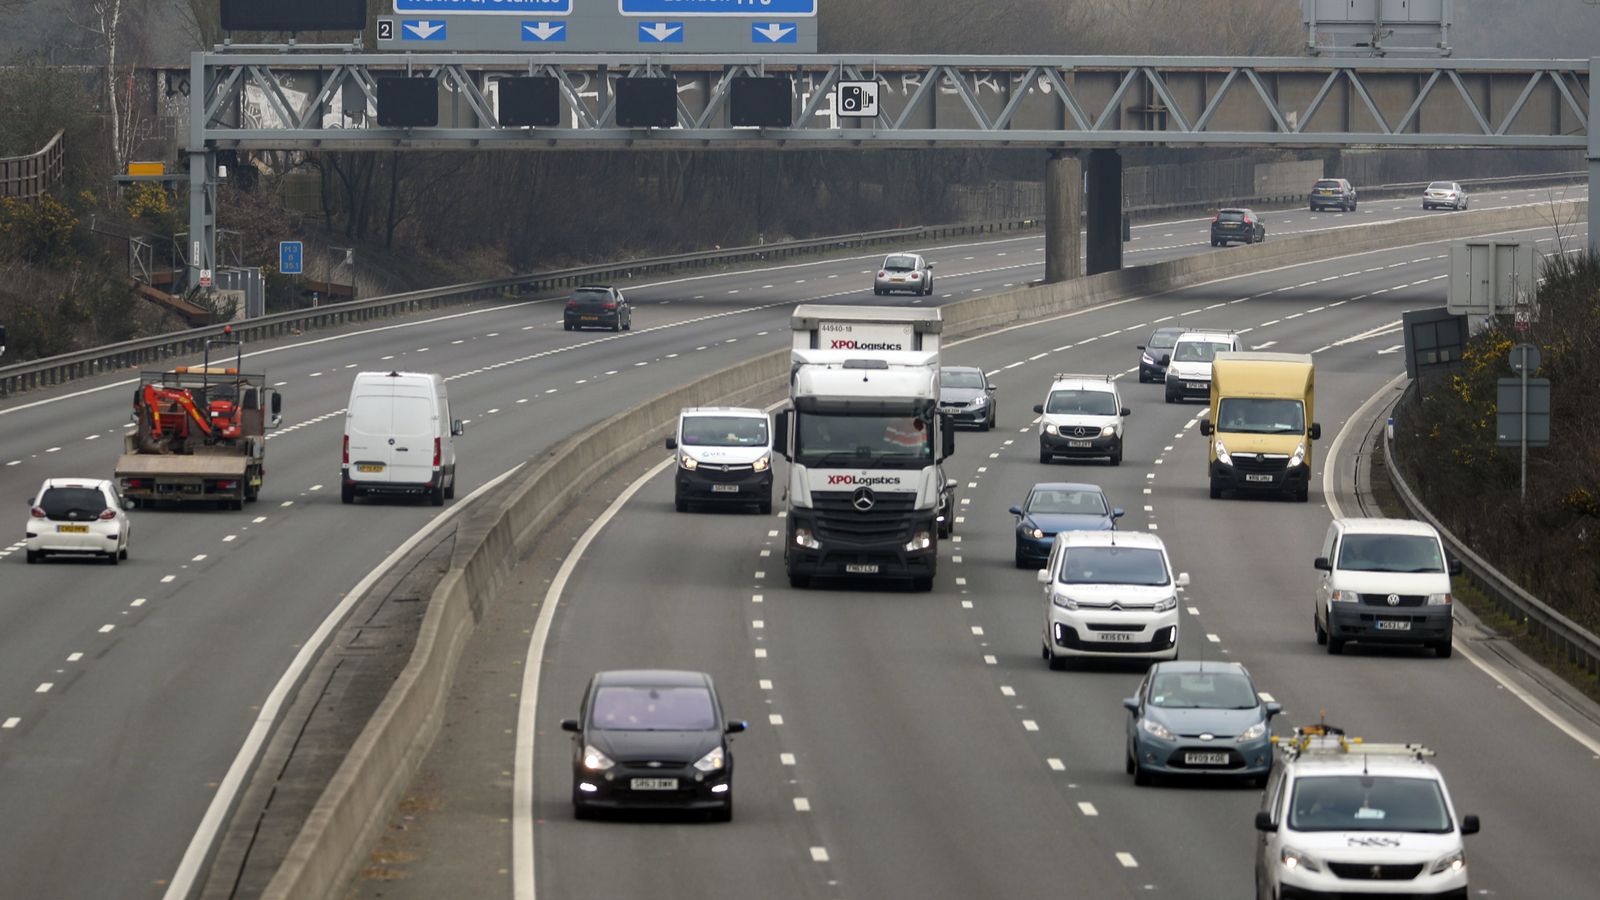 Rishi Sunak to ban new smart motorways - find out if one in your area has been cancelled